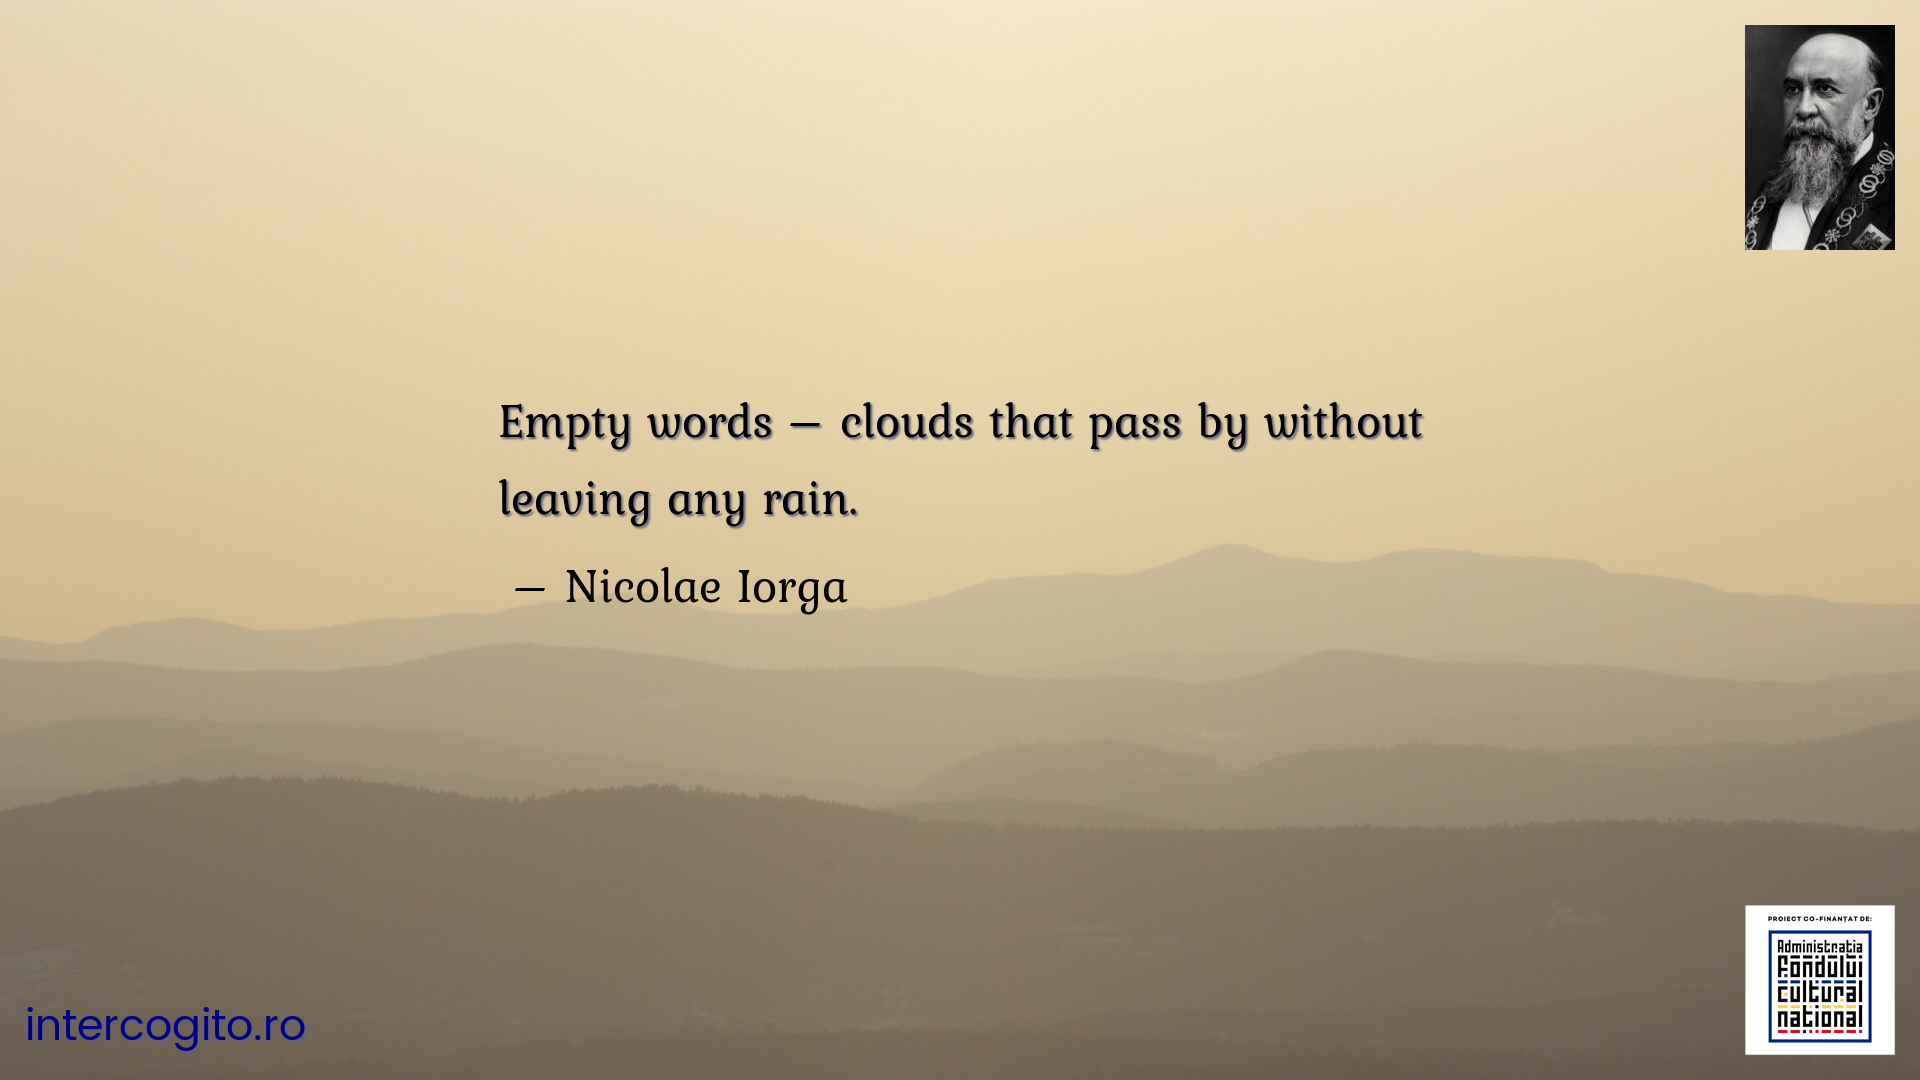 Empty words – clouds that pass by without leaving any rain.